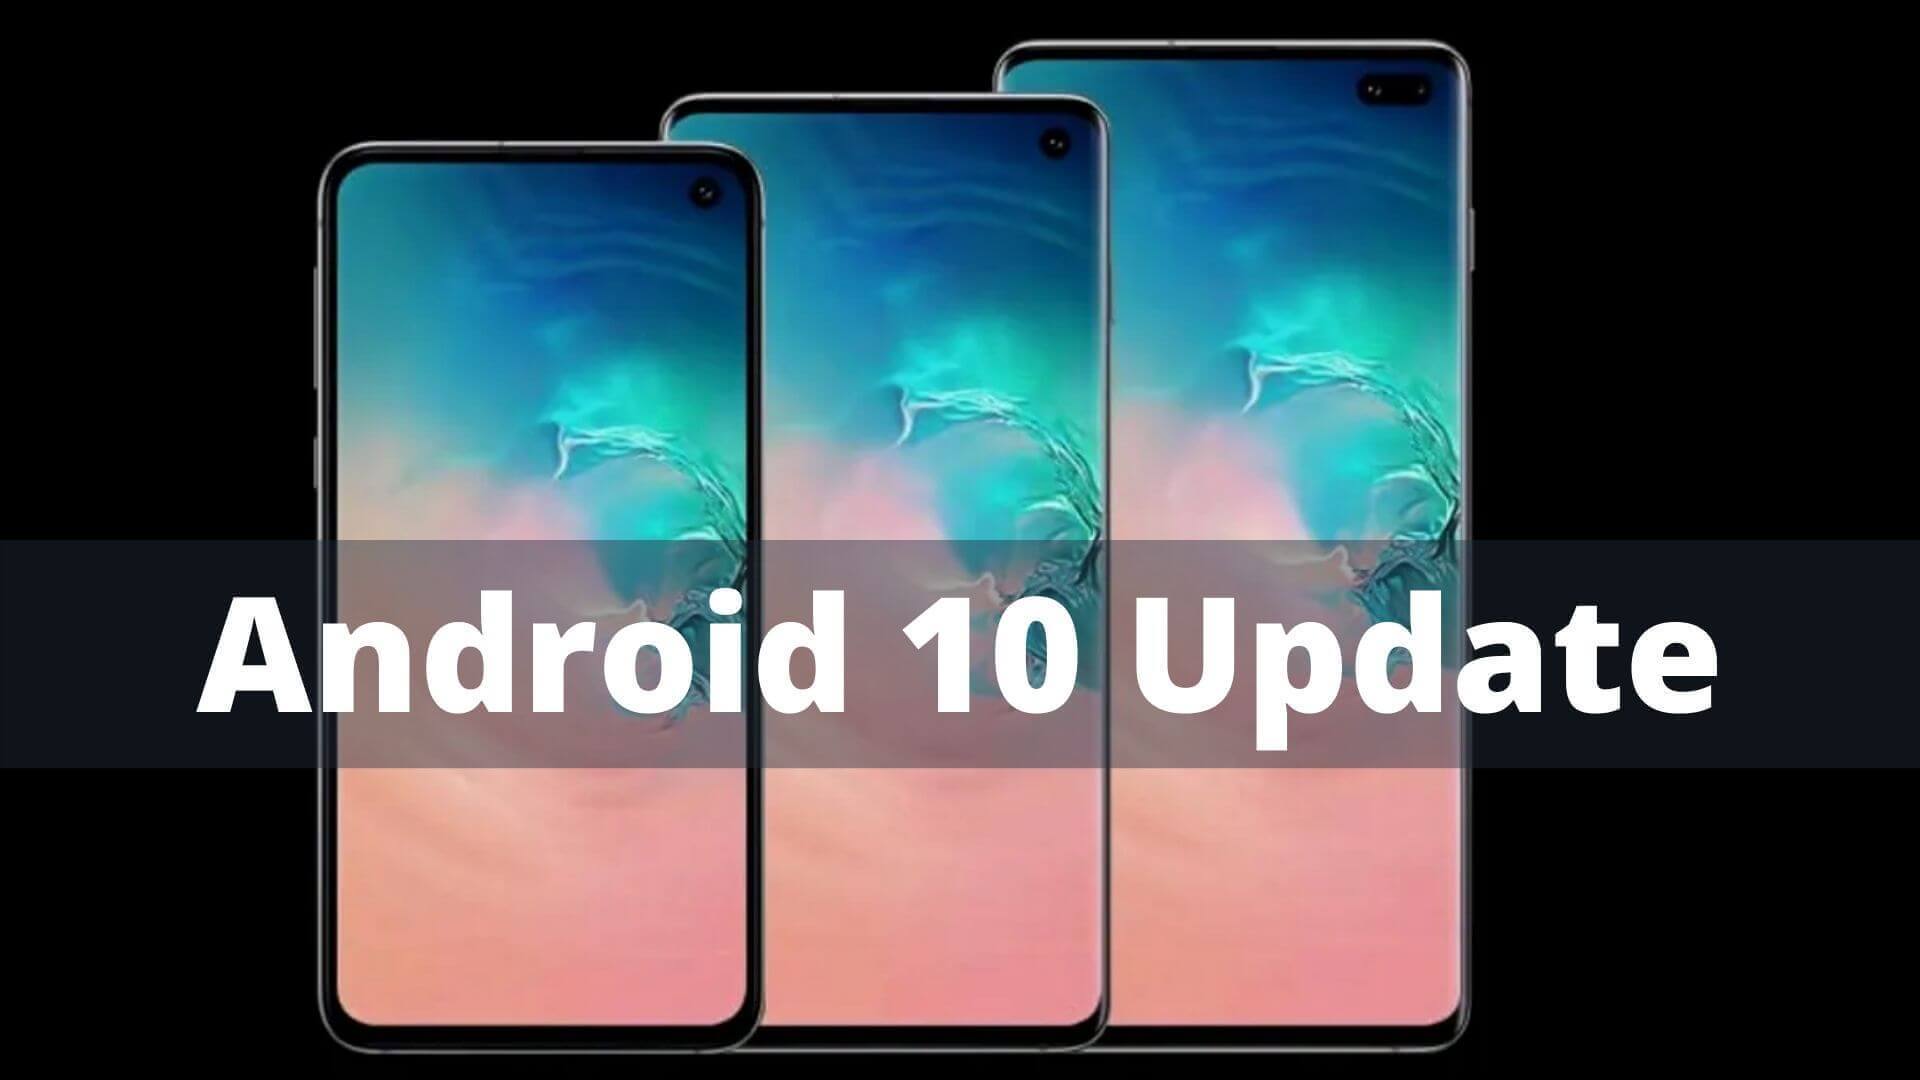 Samsung Galaxy S10 series gets Android 10 update